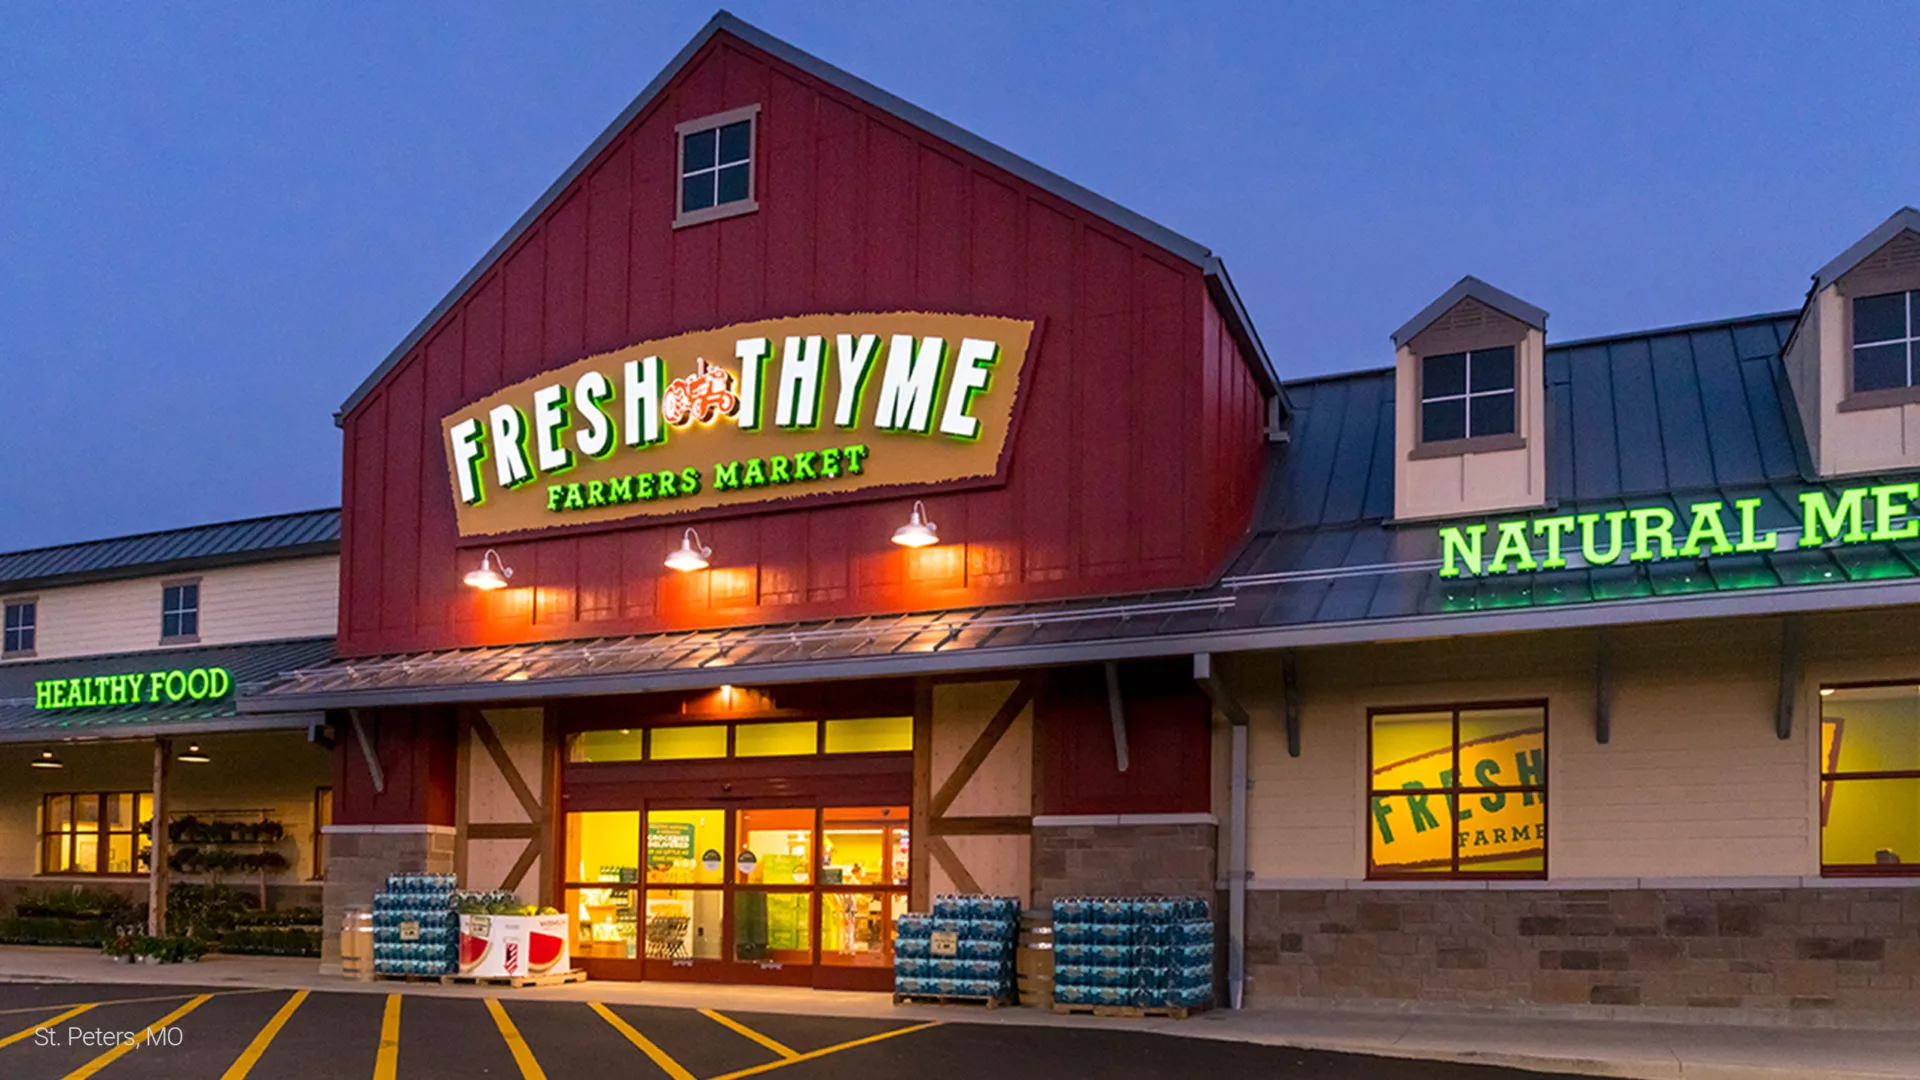 entrance exterior at grocery store Fresh Thyme Market in St. Peters, MO. sign reads "fresh thyme farmers market"